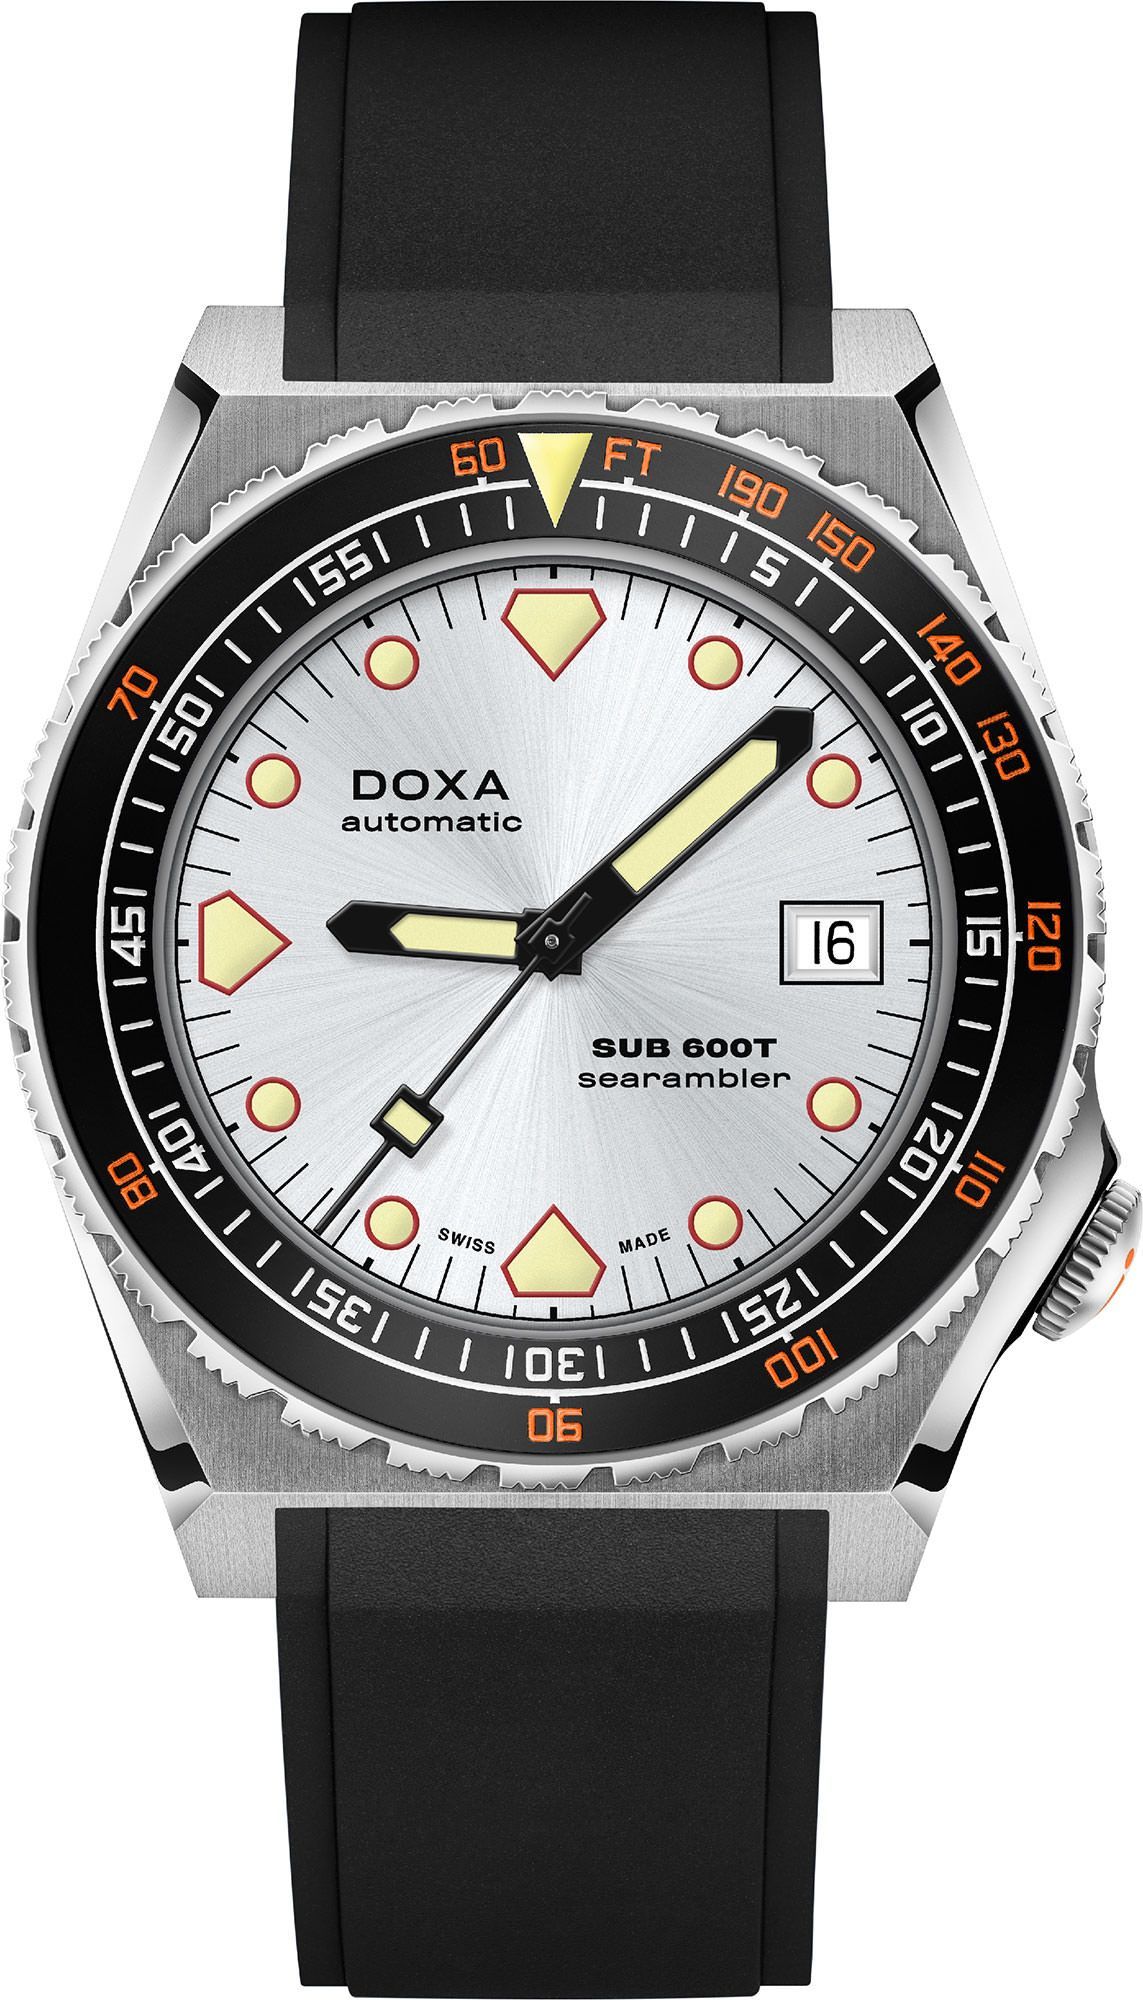 Doxa SUB 600T Searambler Silver Dial 40 mm Automatic Watch For Men - 1